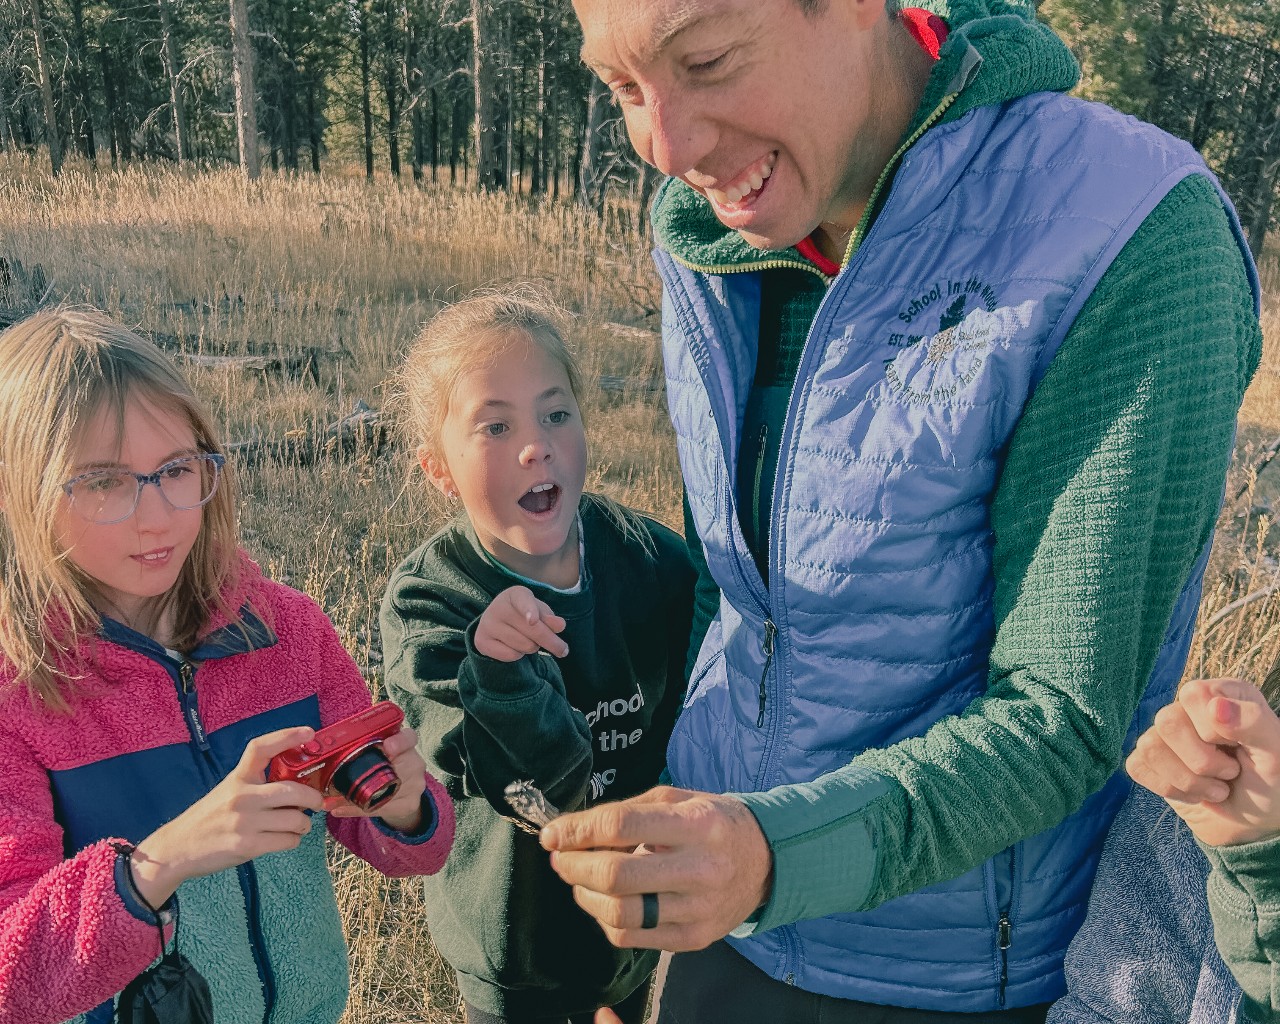 A teacher holding an insect while two students look amazed.